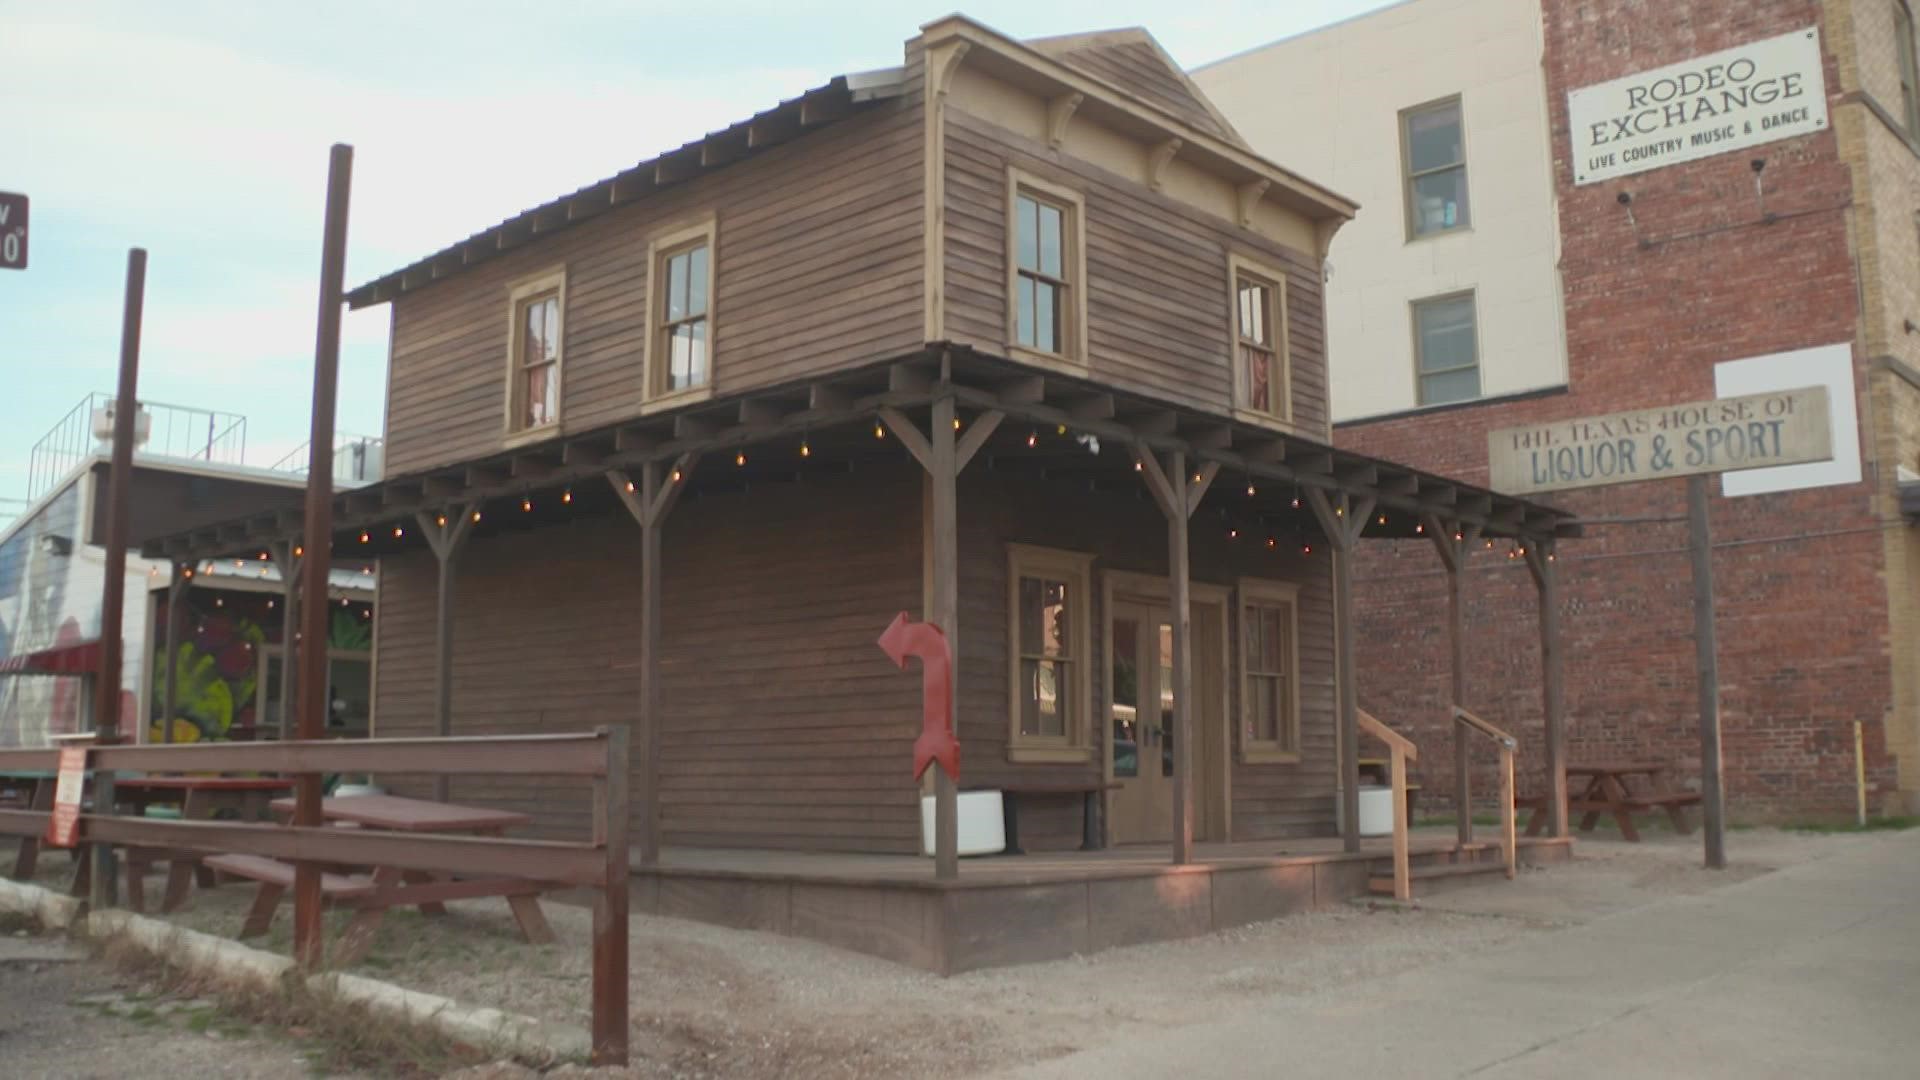 Hooker’s Grill was featured in the Yellowstone prequel 1883.  It’s the only building in the Stockyards that will keep the façade from the show forever!